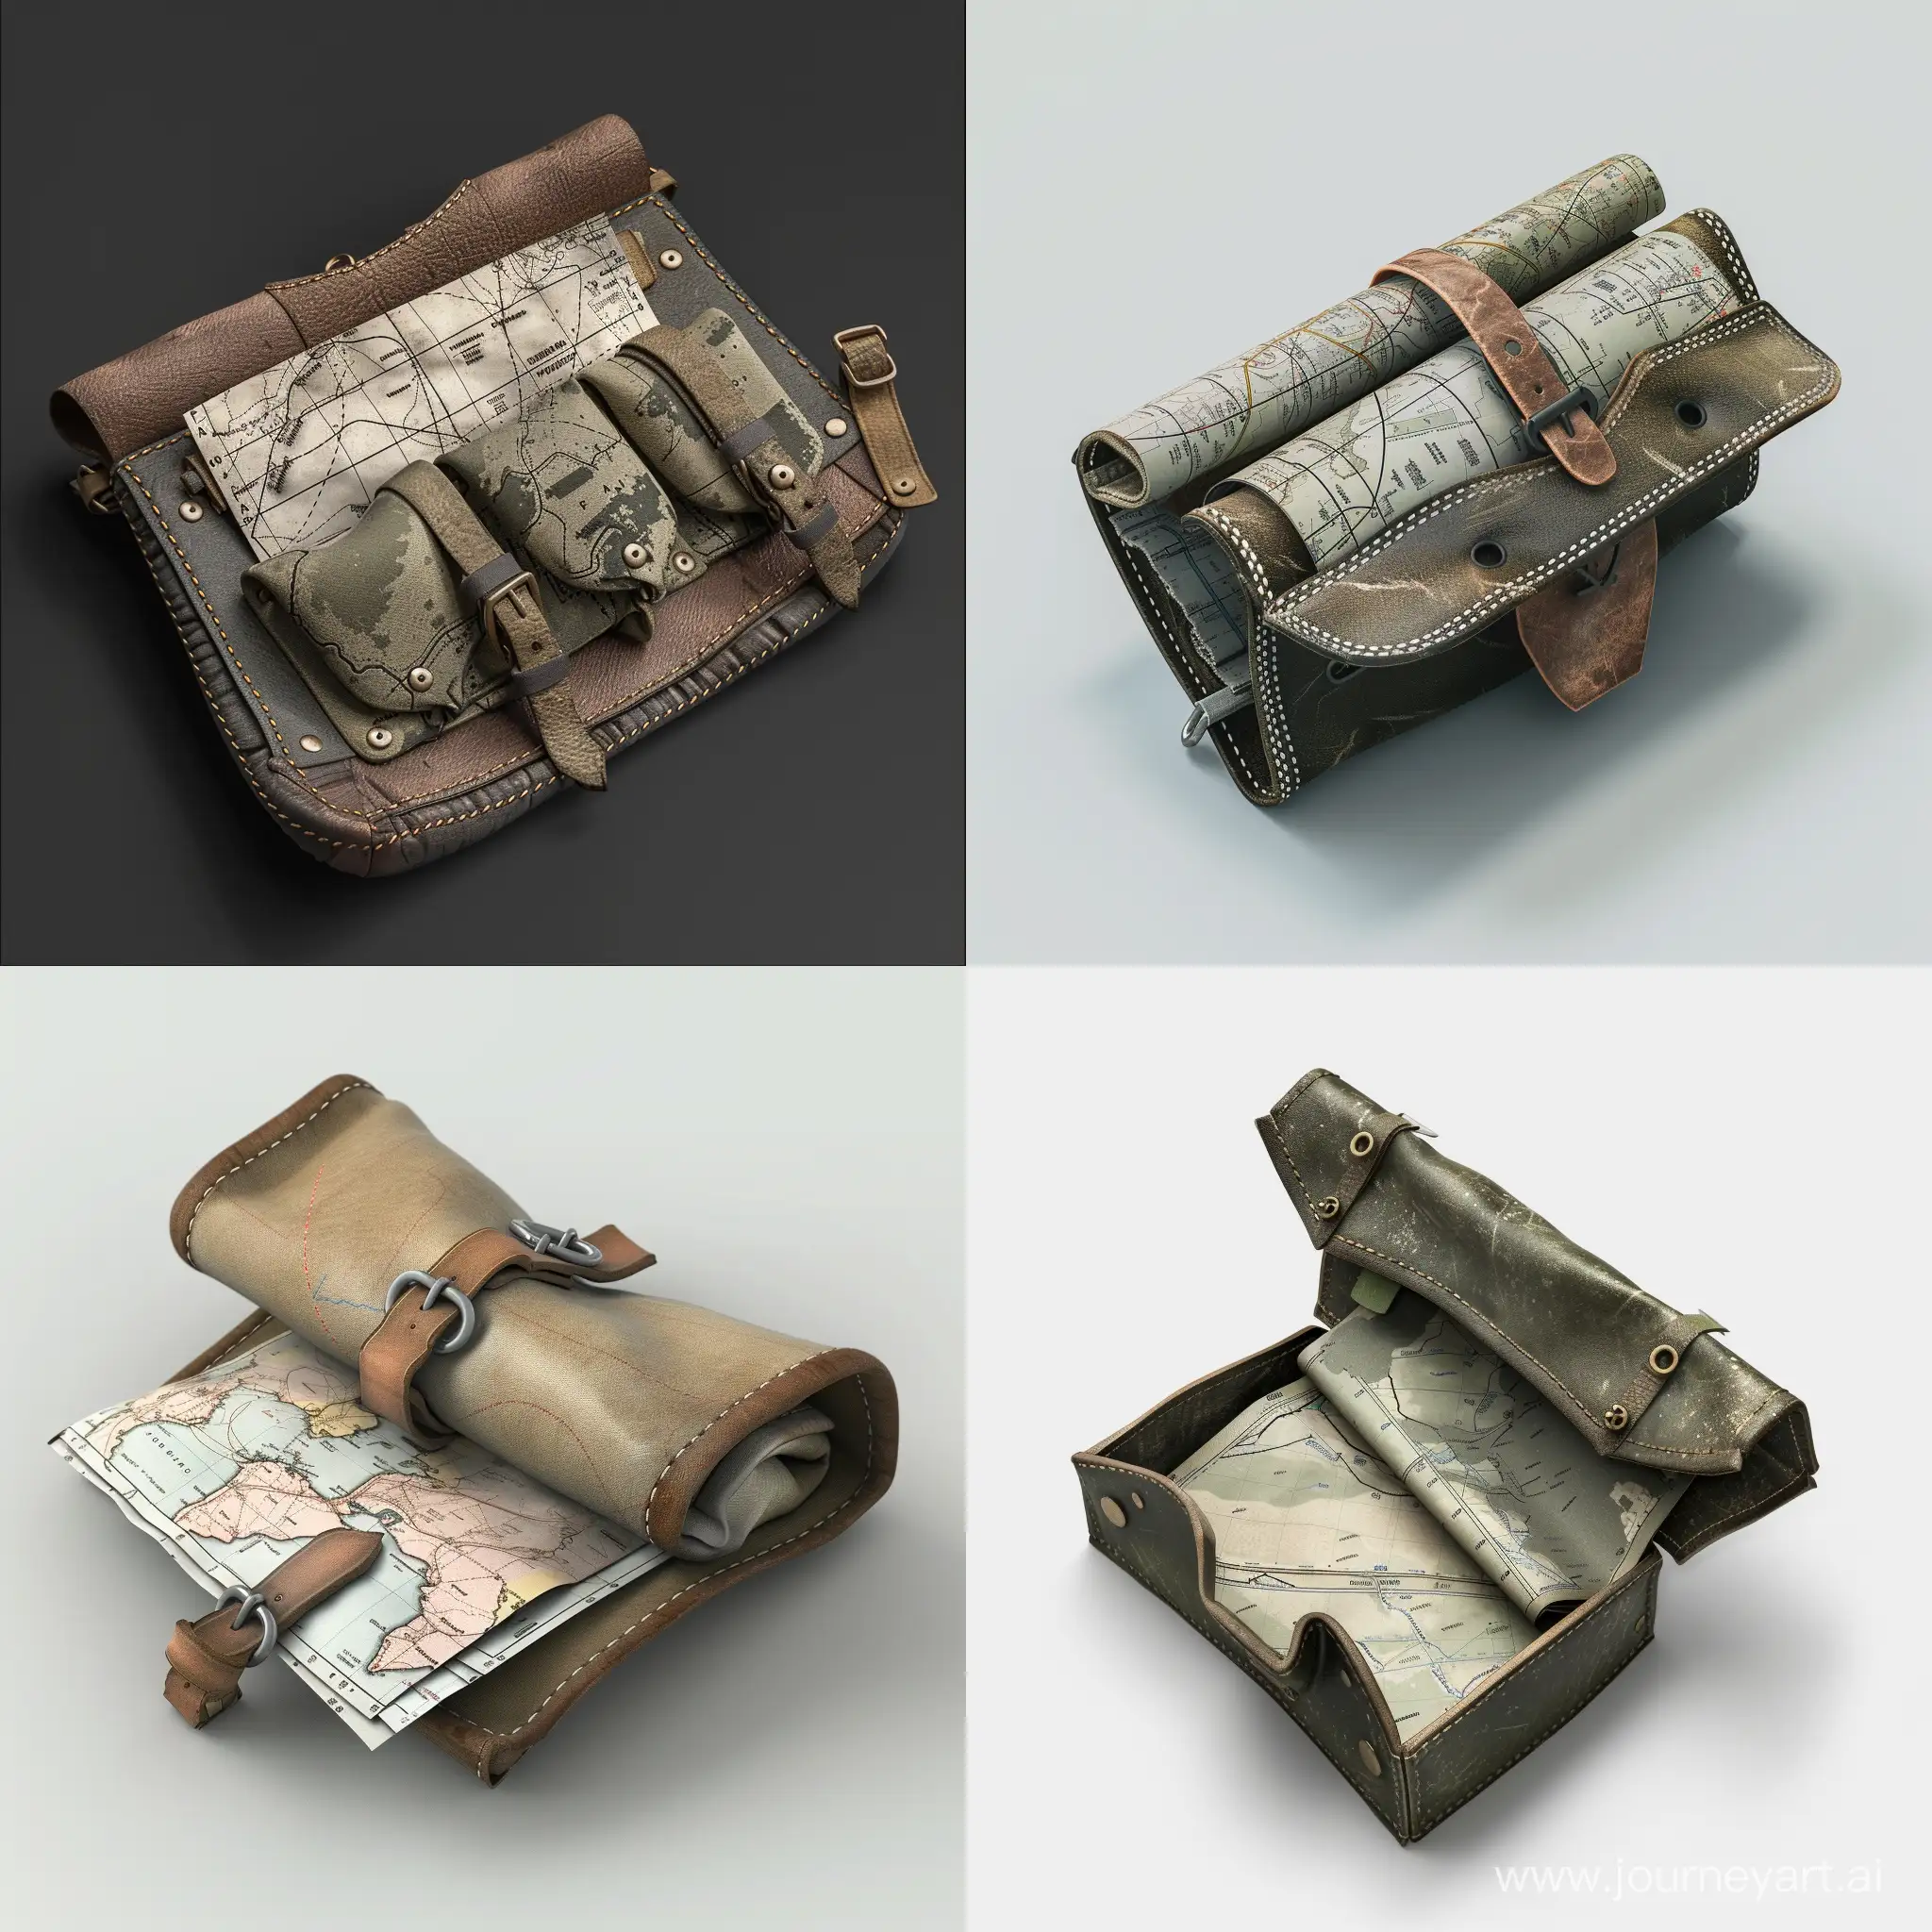 Isometric-Military-Mapping-in-Leather-Pouch-Realistic-3D-Render